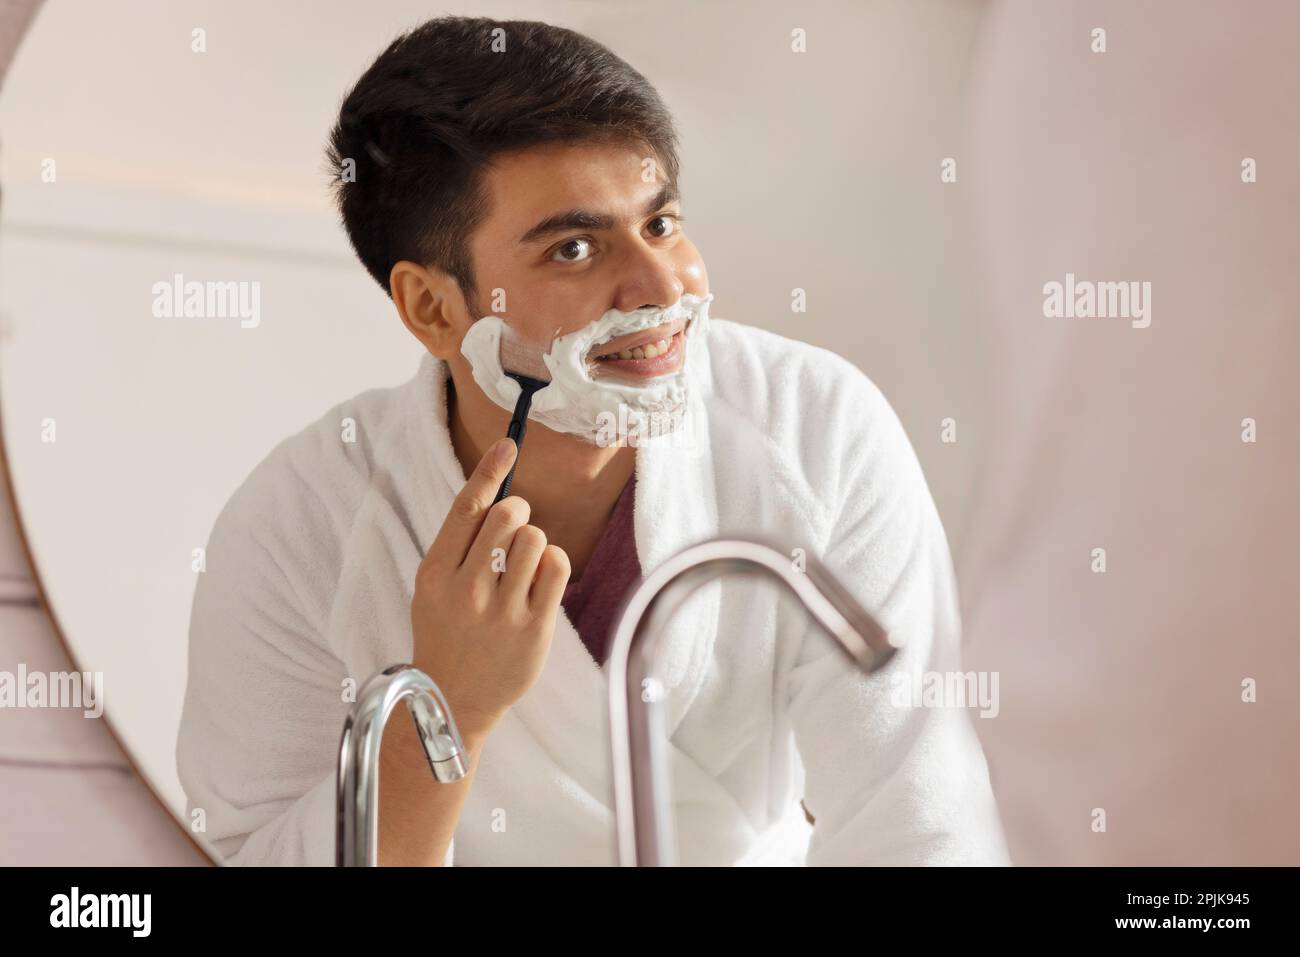 Young man shaving in front of bathroom mirror Stock Photo